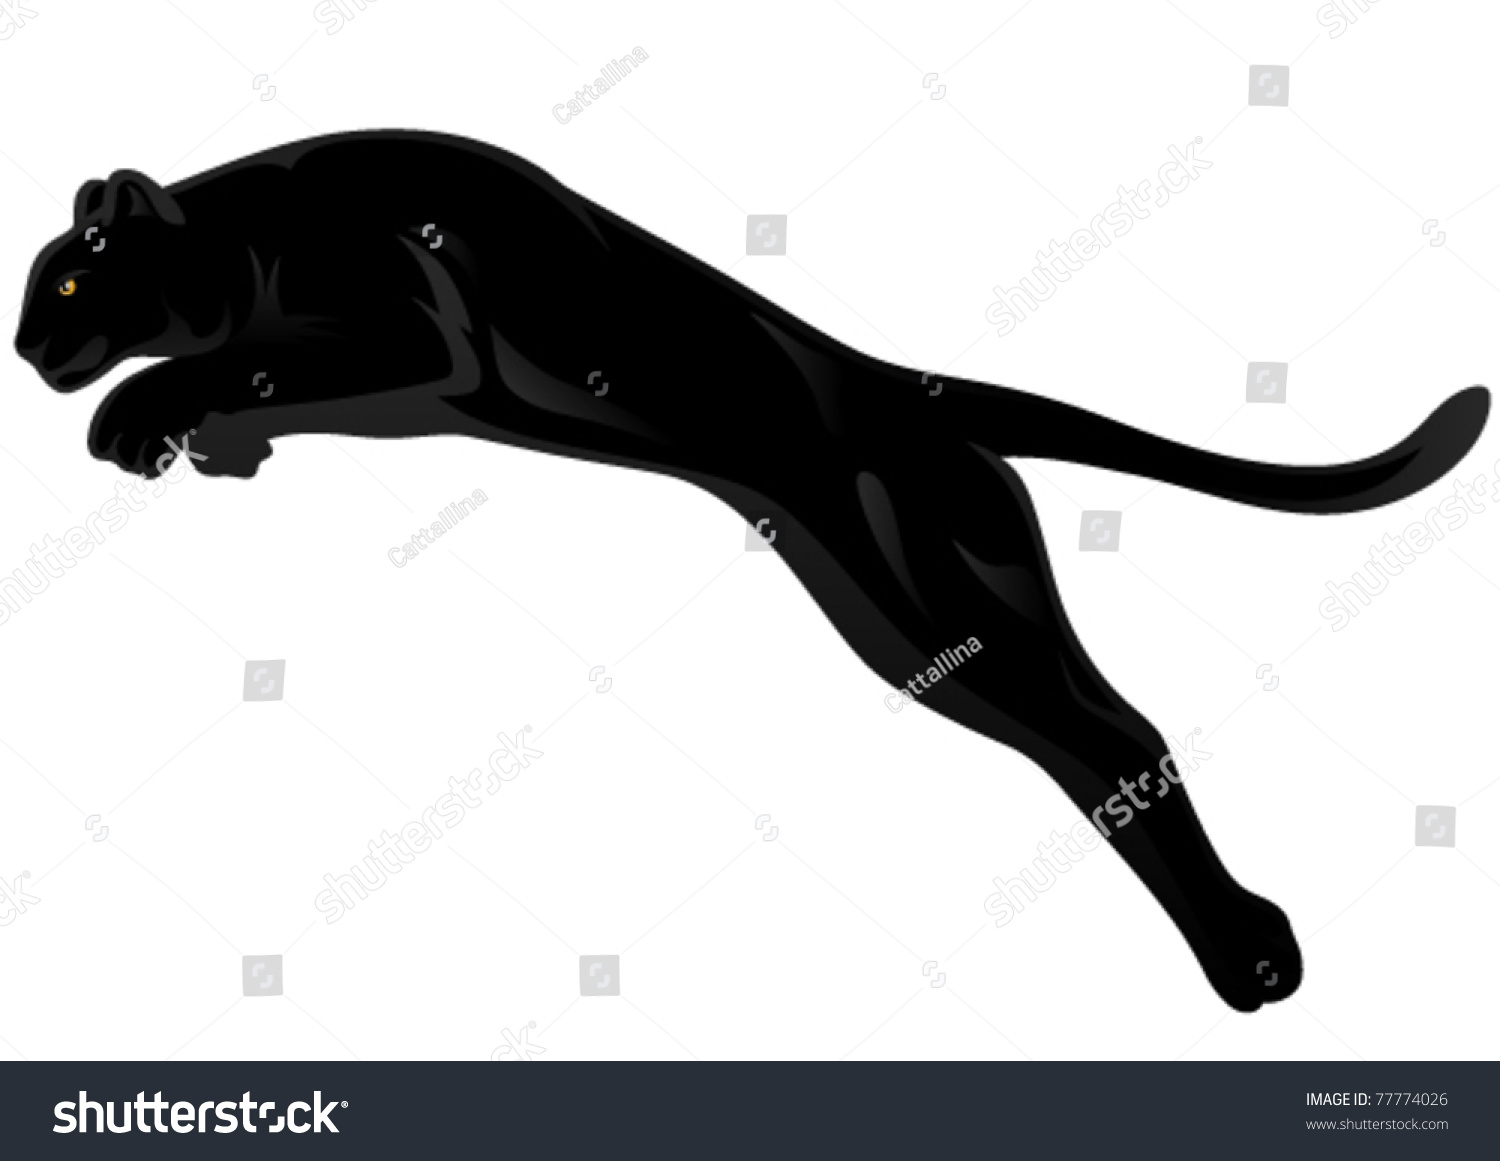 Black Panther Attacking Vector Illustration Stock Vector 77774026